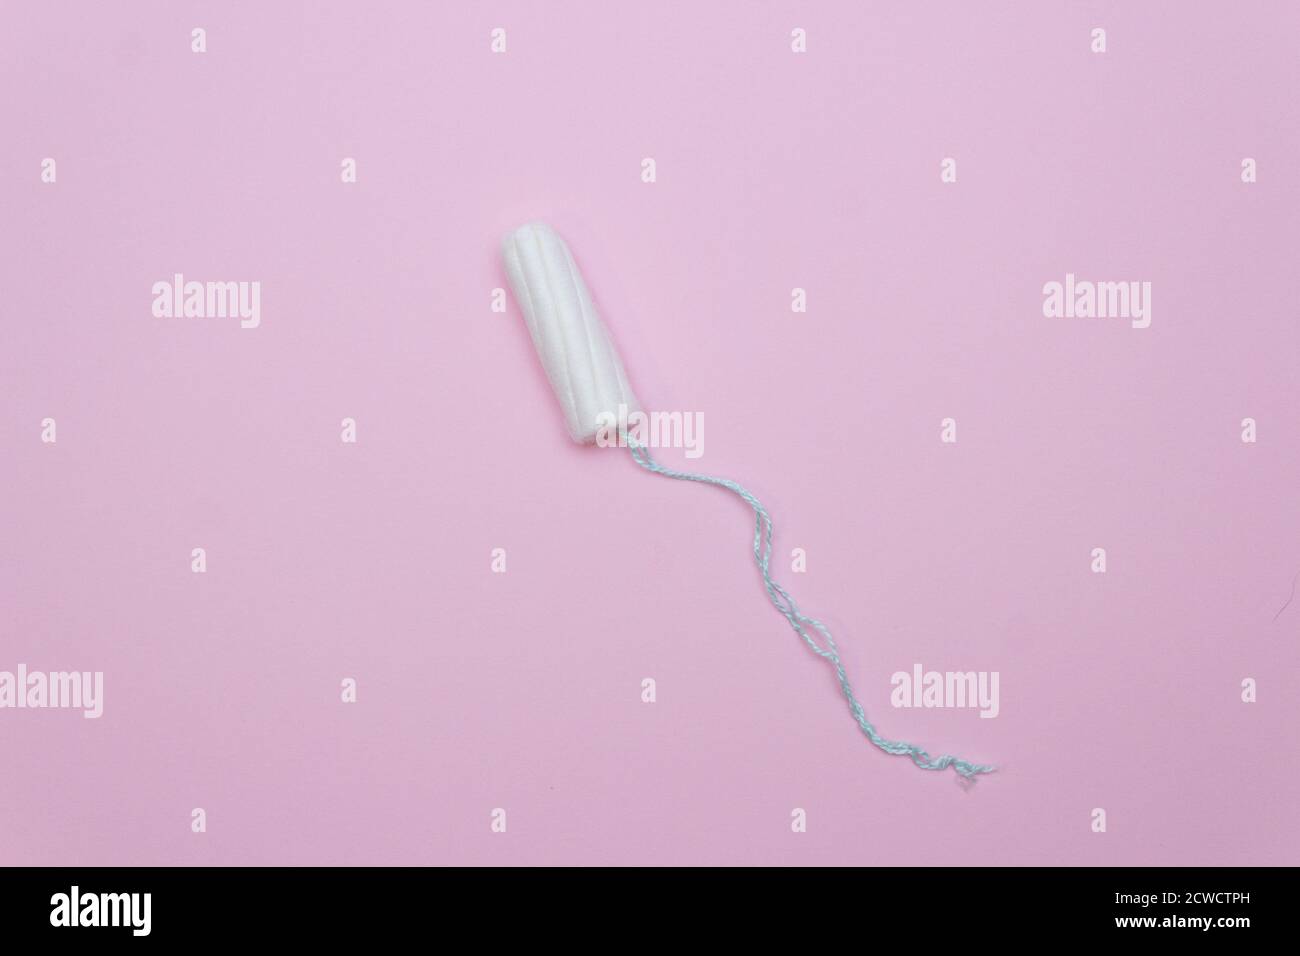 TAMPON CLEAN +